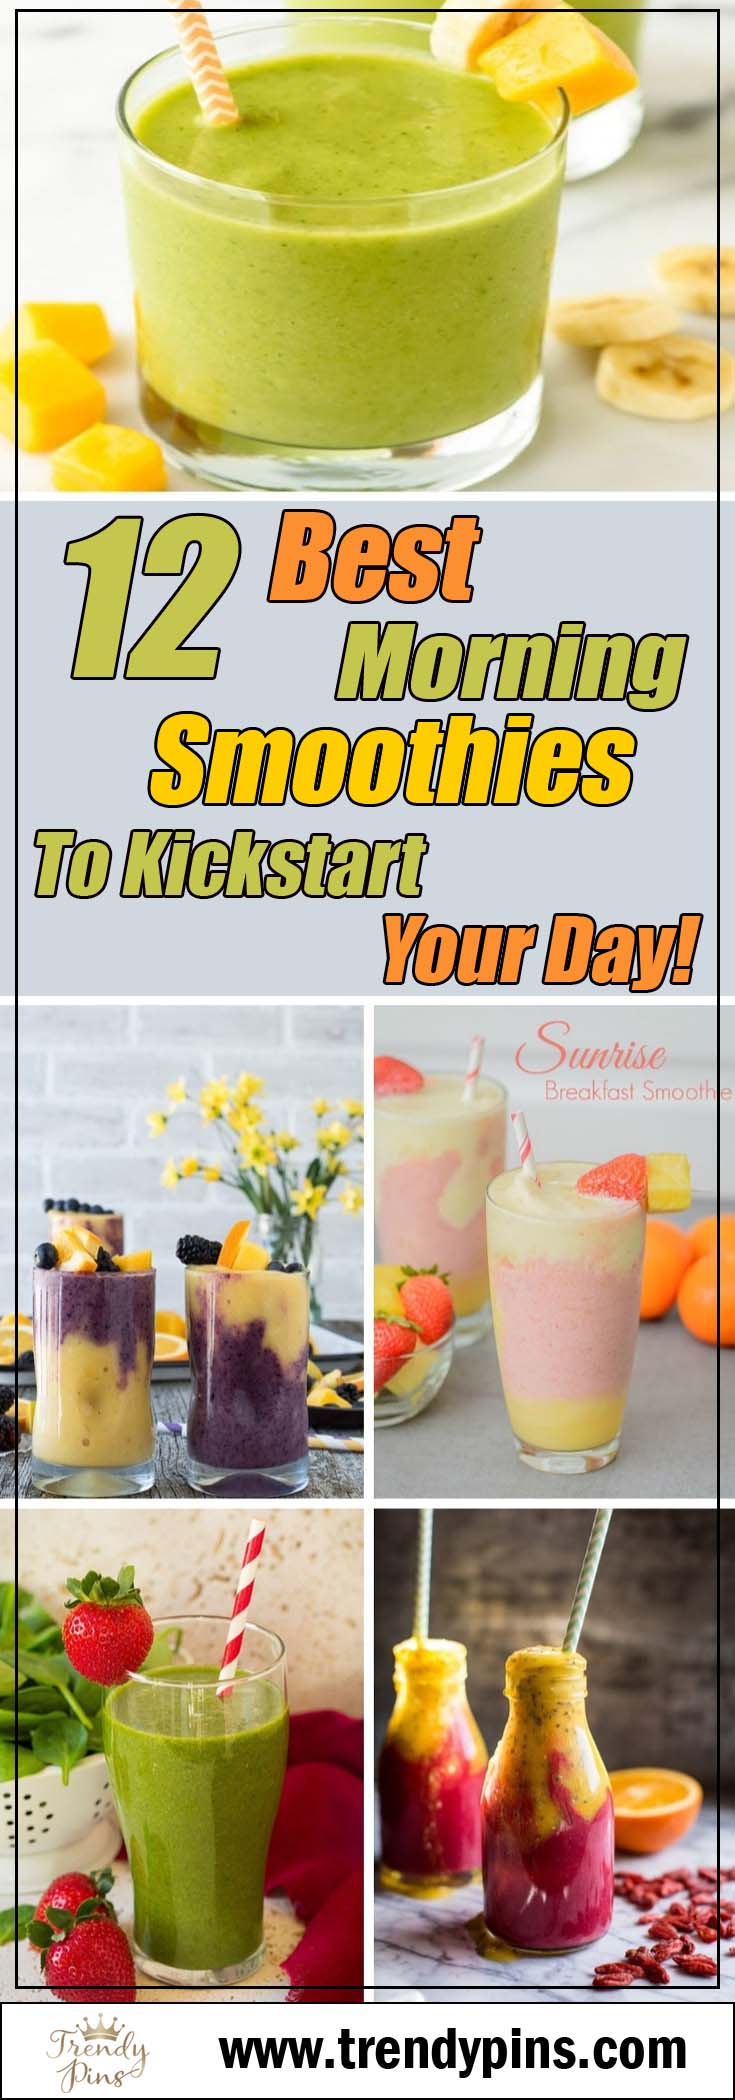 12 best morning smoothies to kickstart your day! #healthy living #healthy food #beauty #trendypins